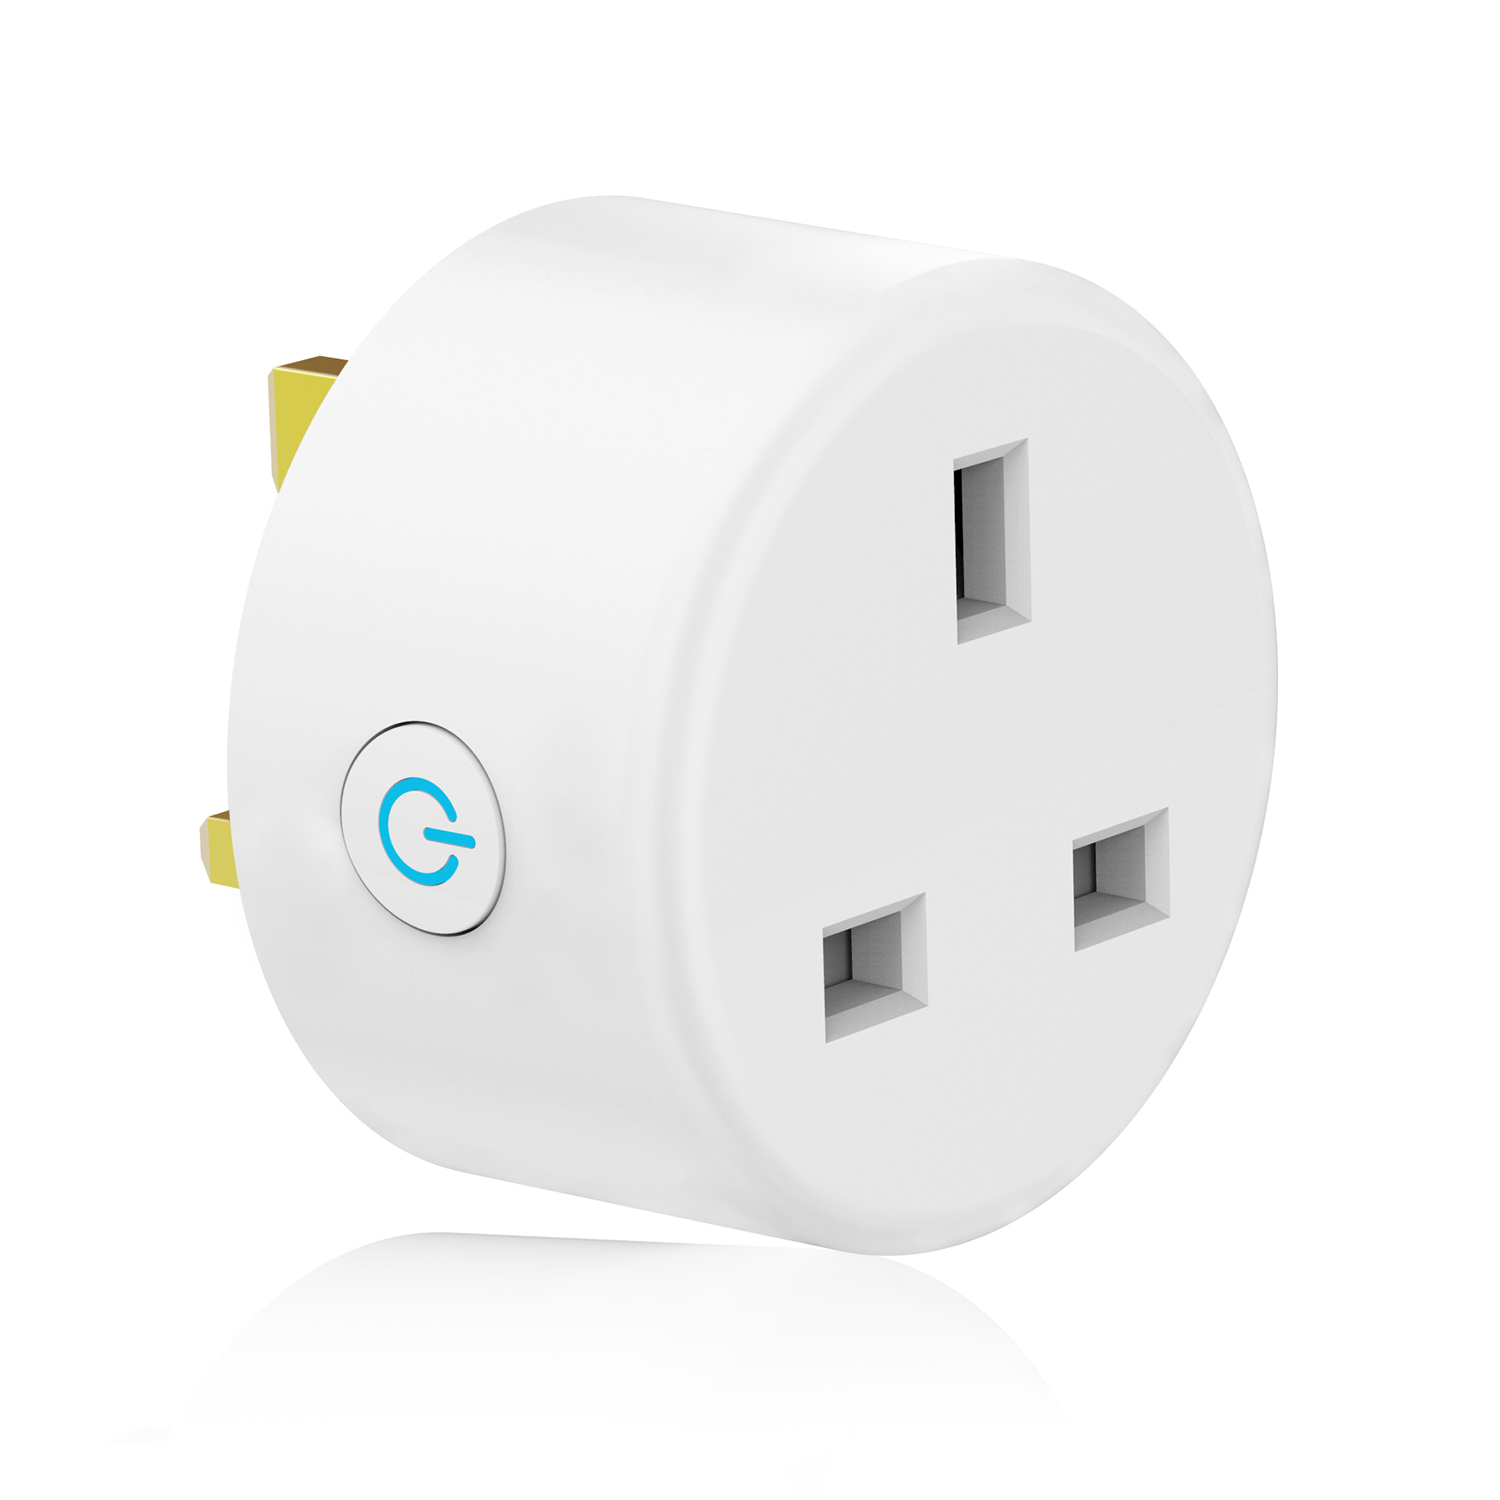 Gosund Smart Plug Socket Mini Electrical Outlet Switch 13A With Independent Control Switch Timing Function APP Remote Control Works With Alexa And Google Home UK Plug